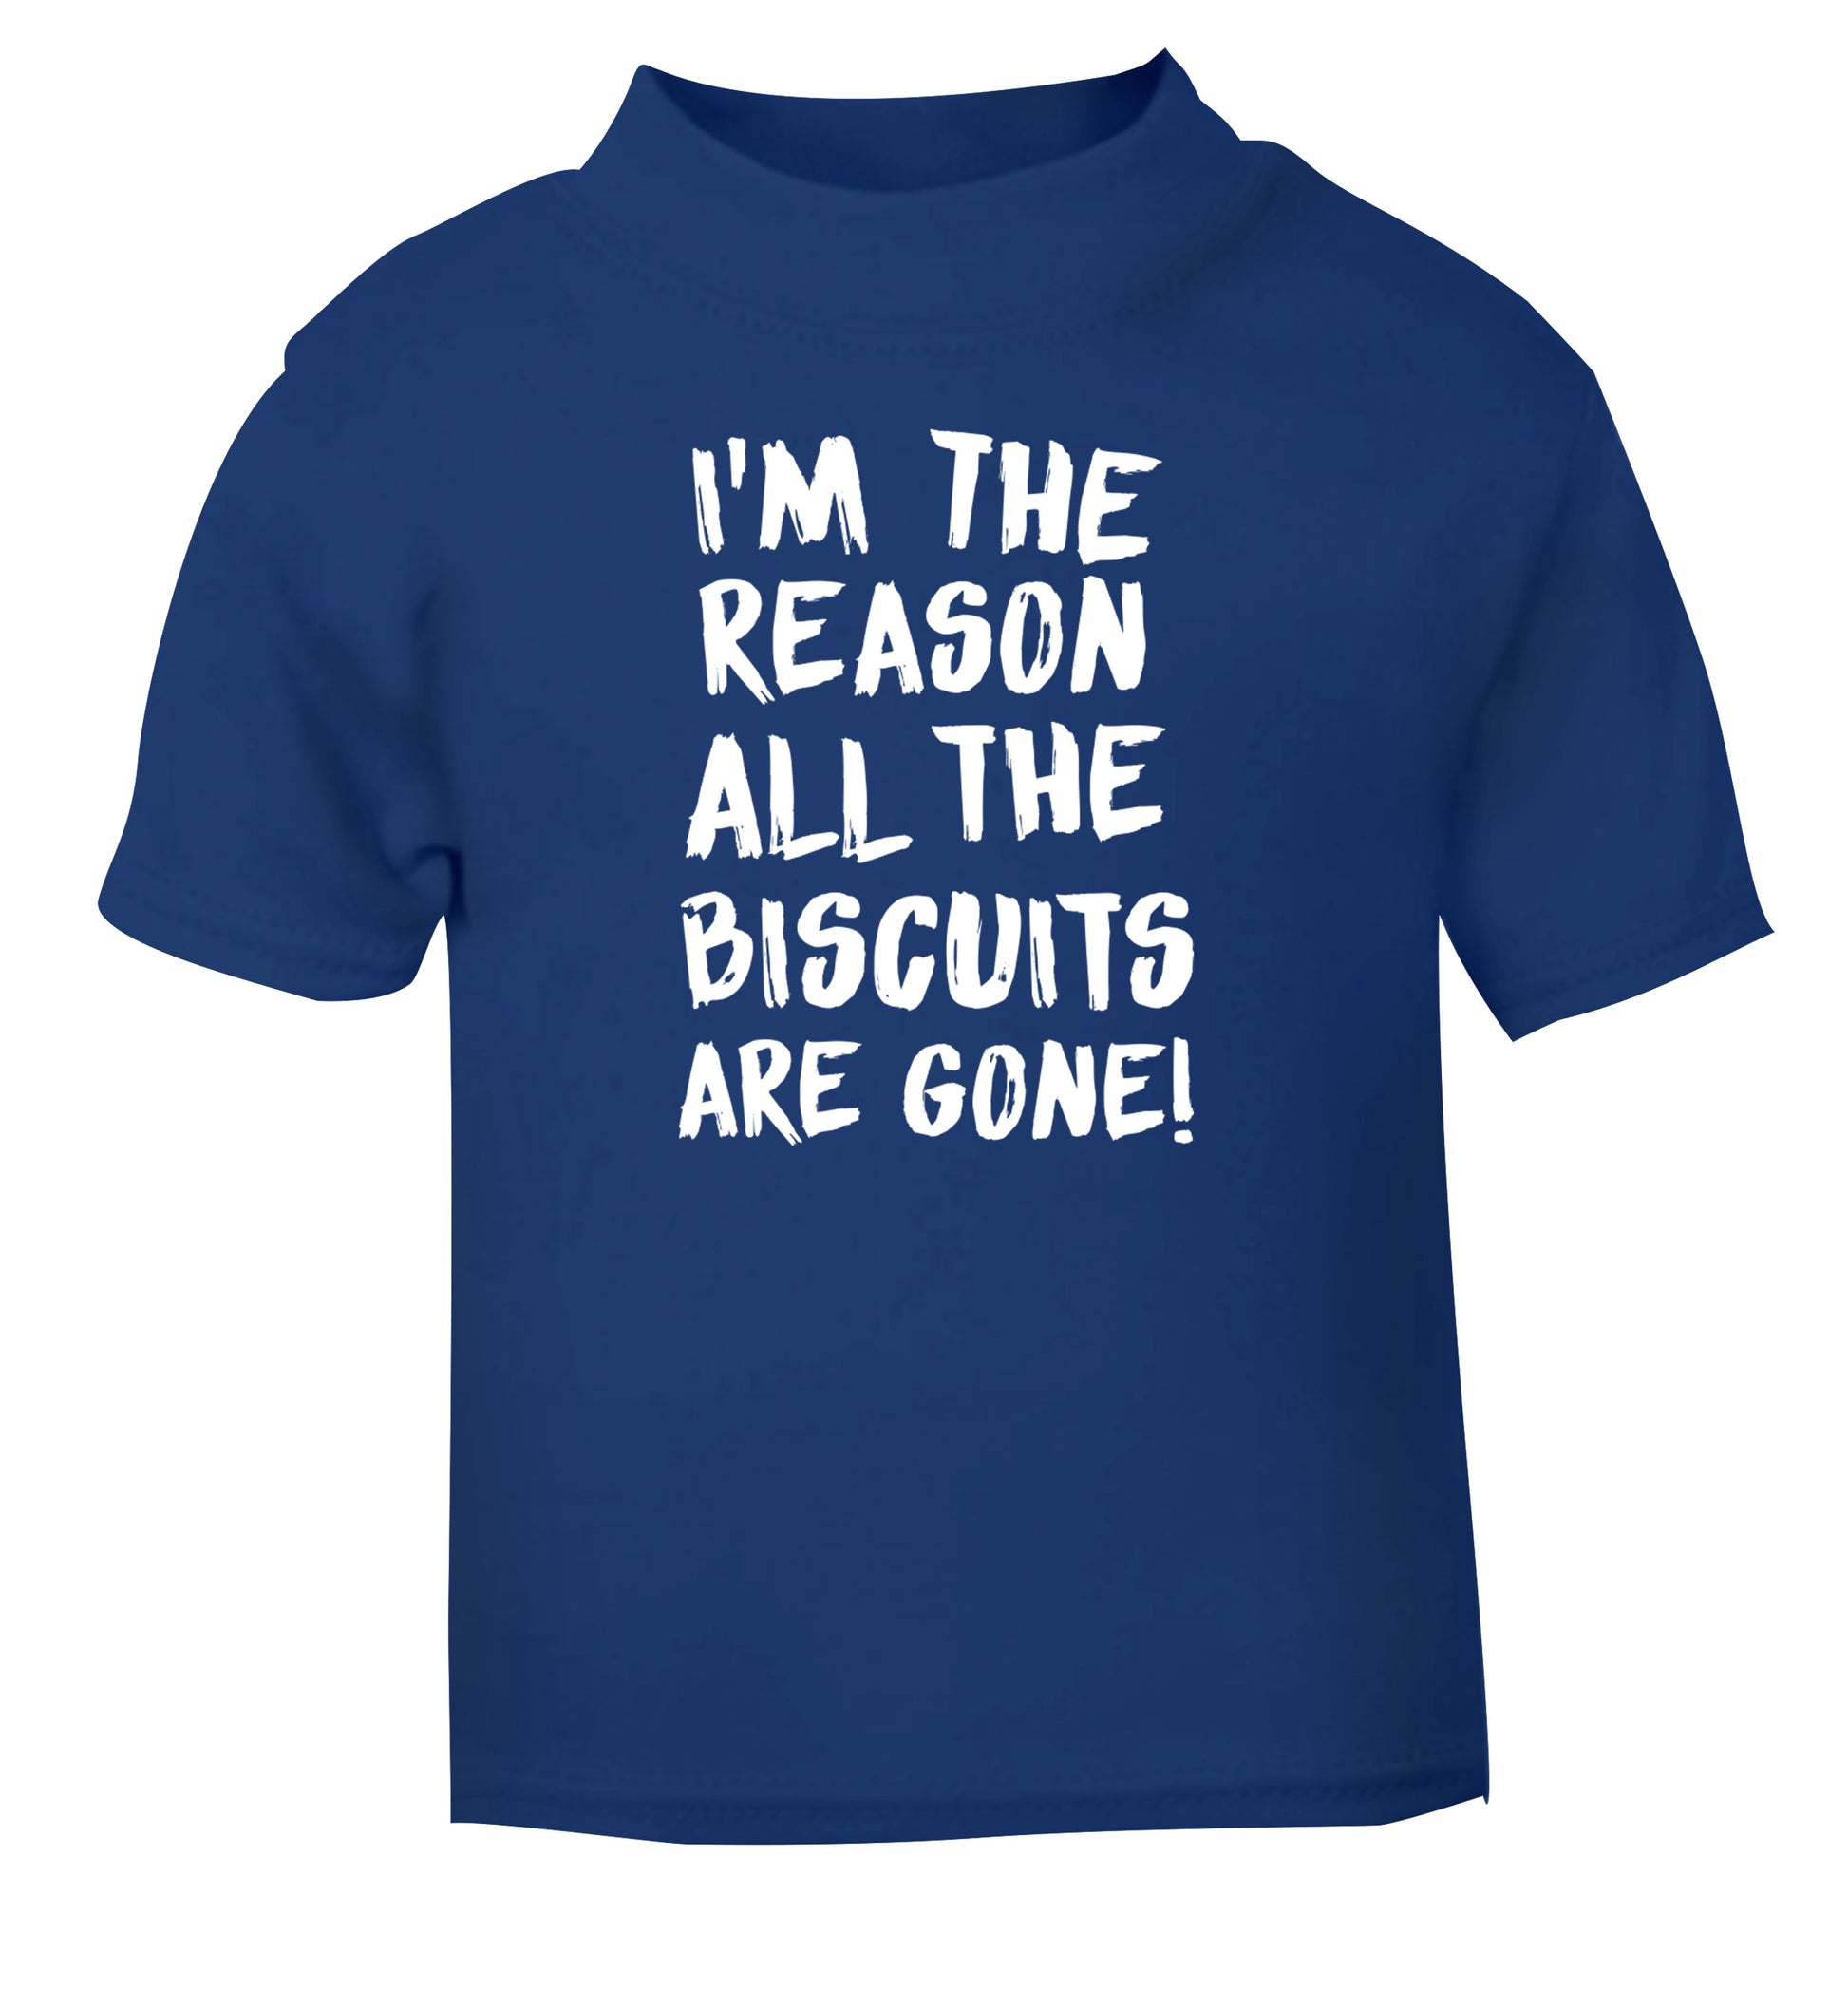 I'm the reason why all the biscuits are gone blue Baby Toddler Tshirt 2 Years